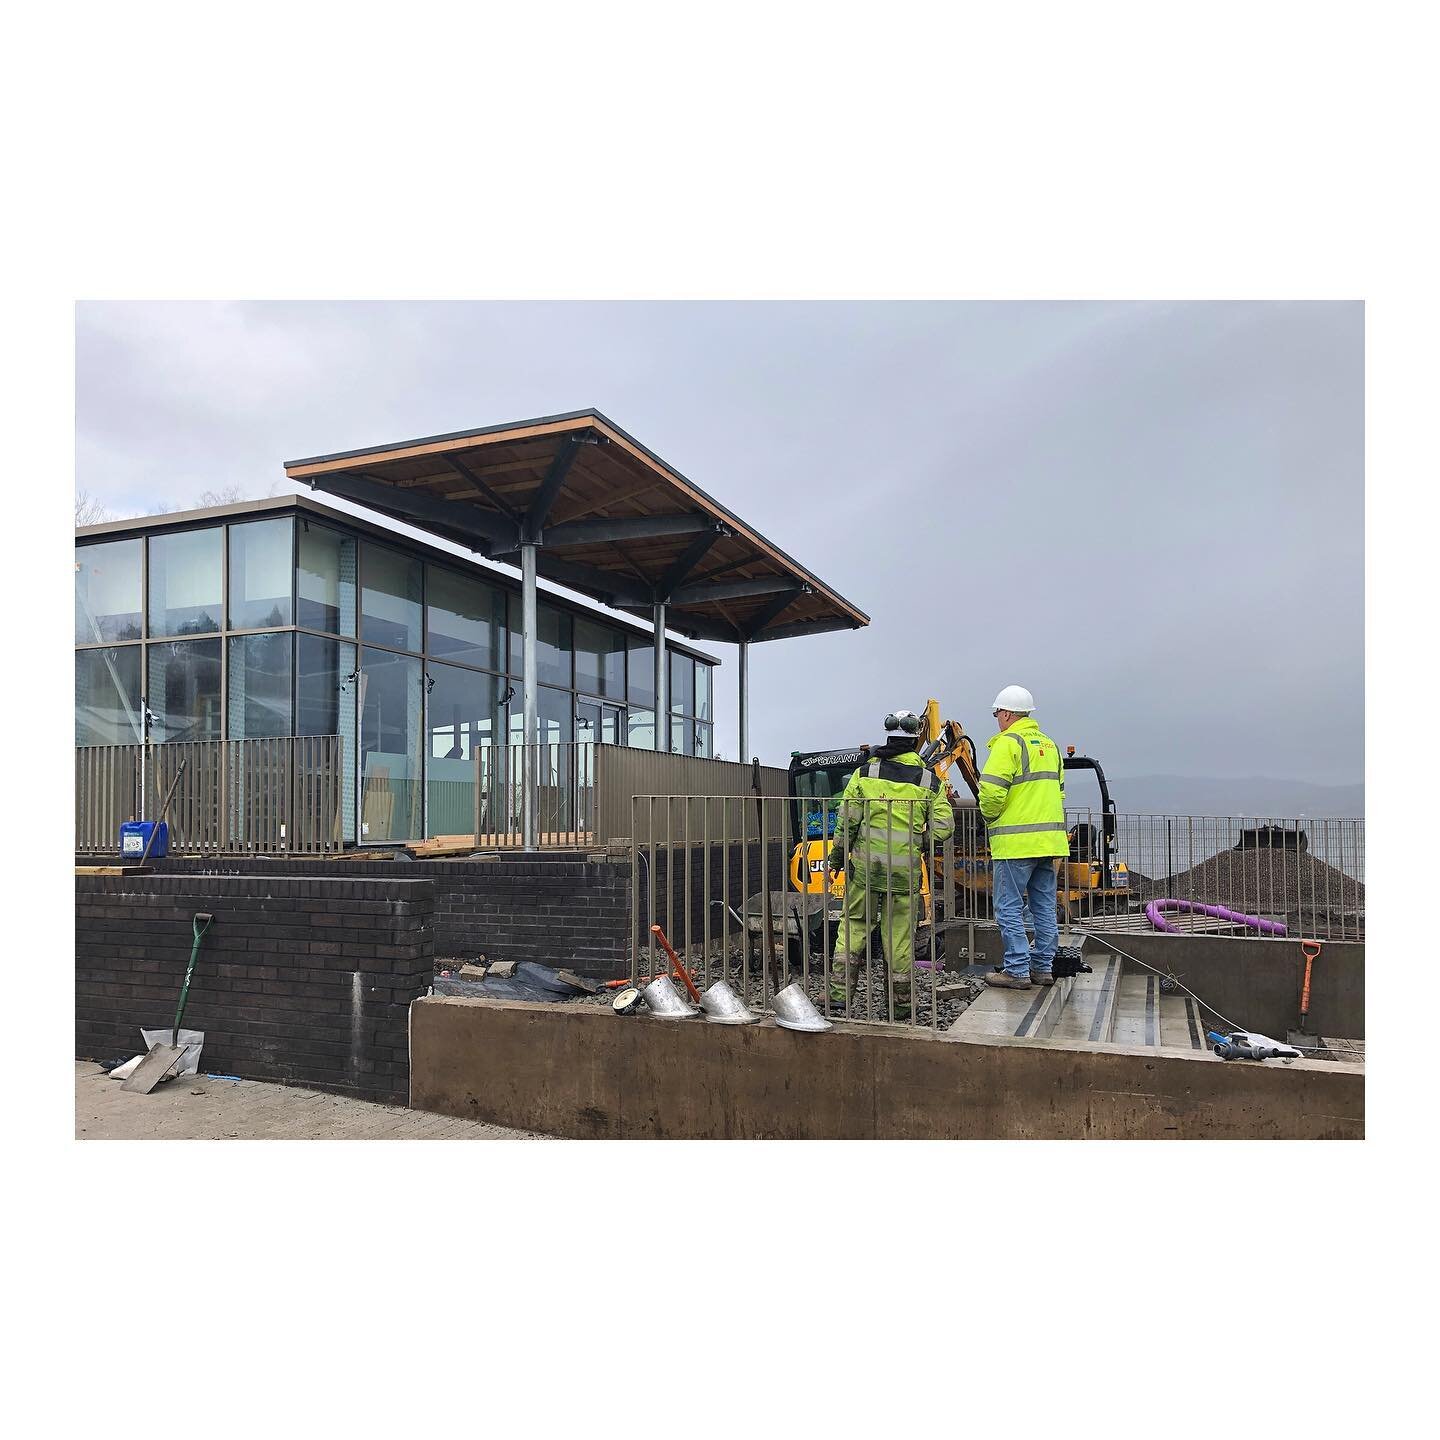 Parklea Branching Out Site Progress
&nbsp;
Following the removal of the scaffolding, it&rsquo;s great to see progress of the Parklea Community Hub on site last week, with internal and landscaping works taking place in the coming months.
&nbsp;
We are